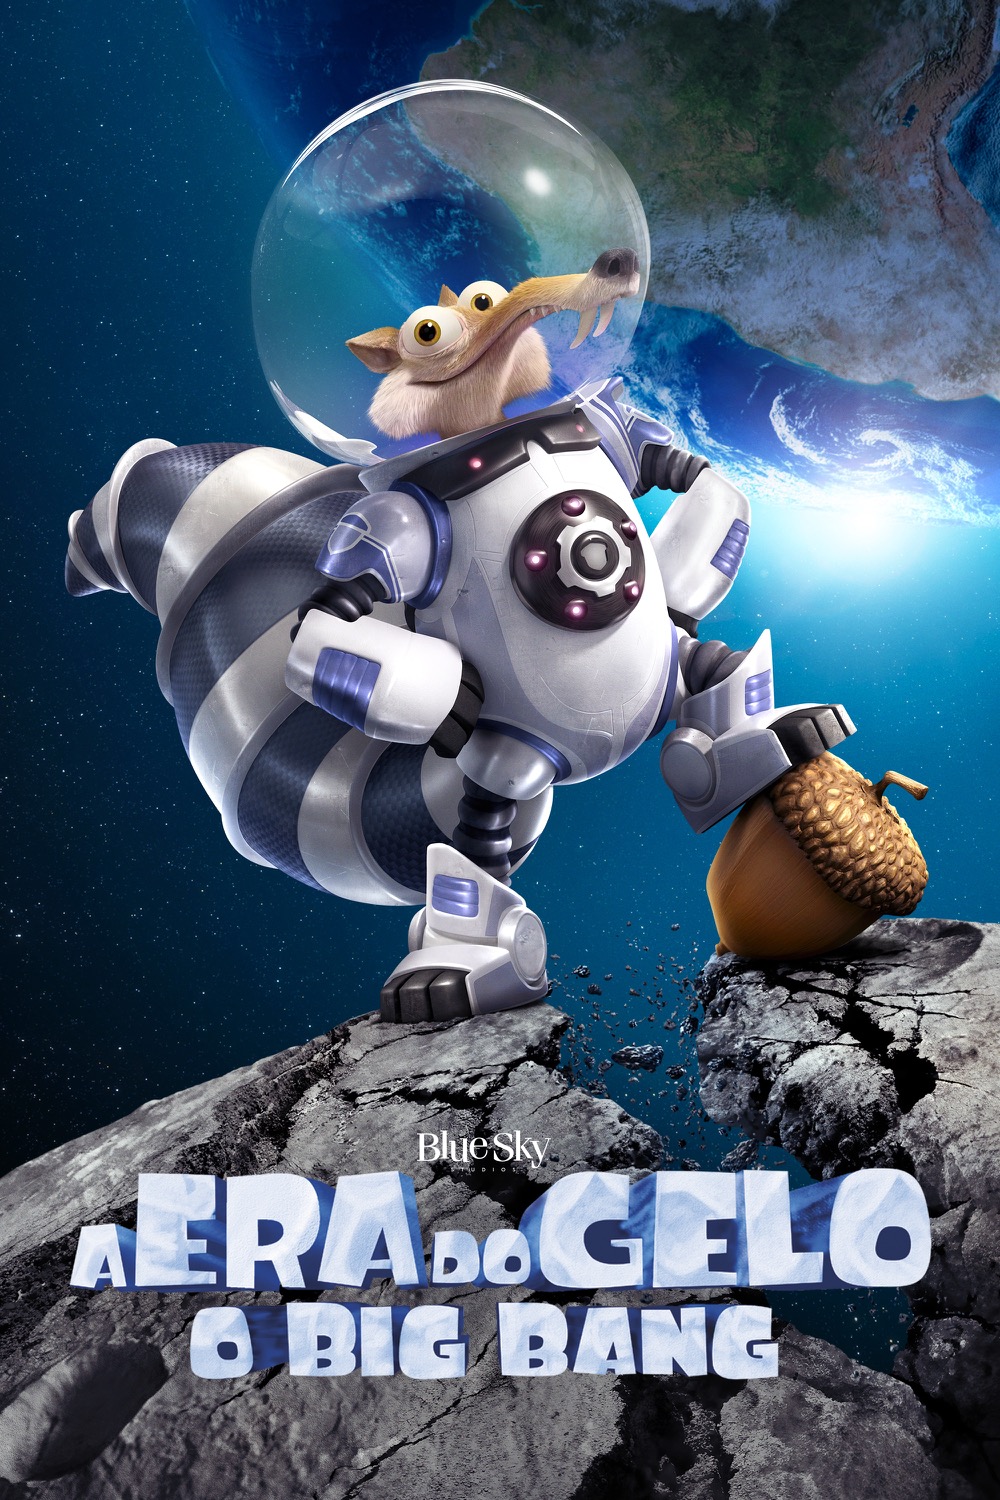 Movie of the week: buy the animation “Ice Age - The Big Bang” for $ 3!